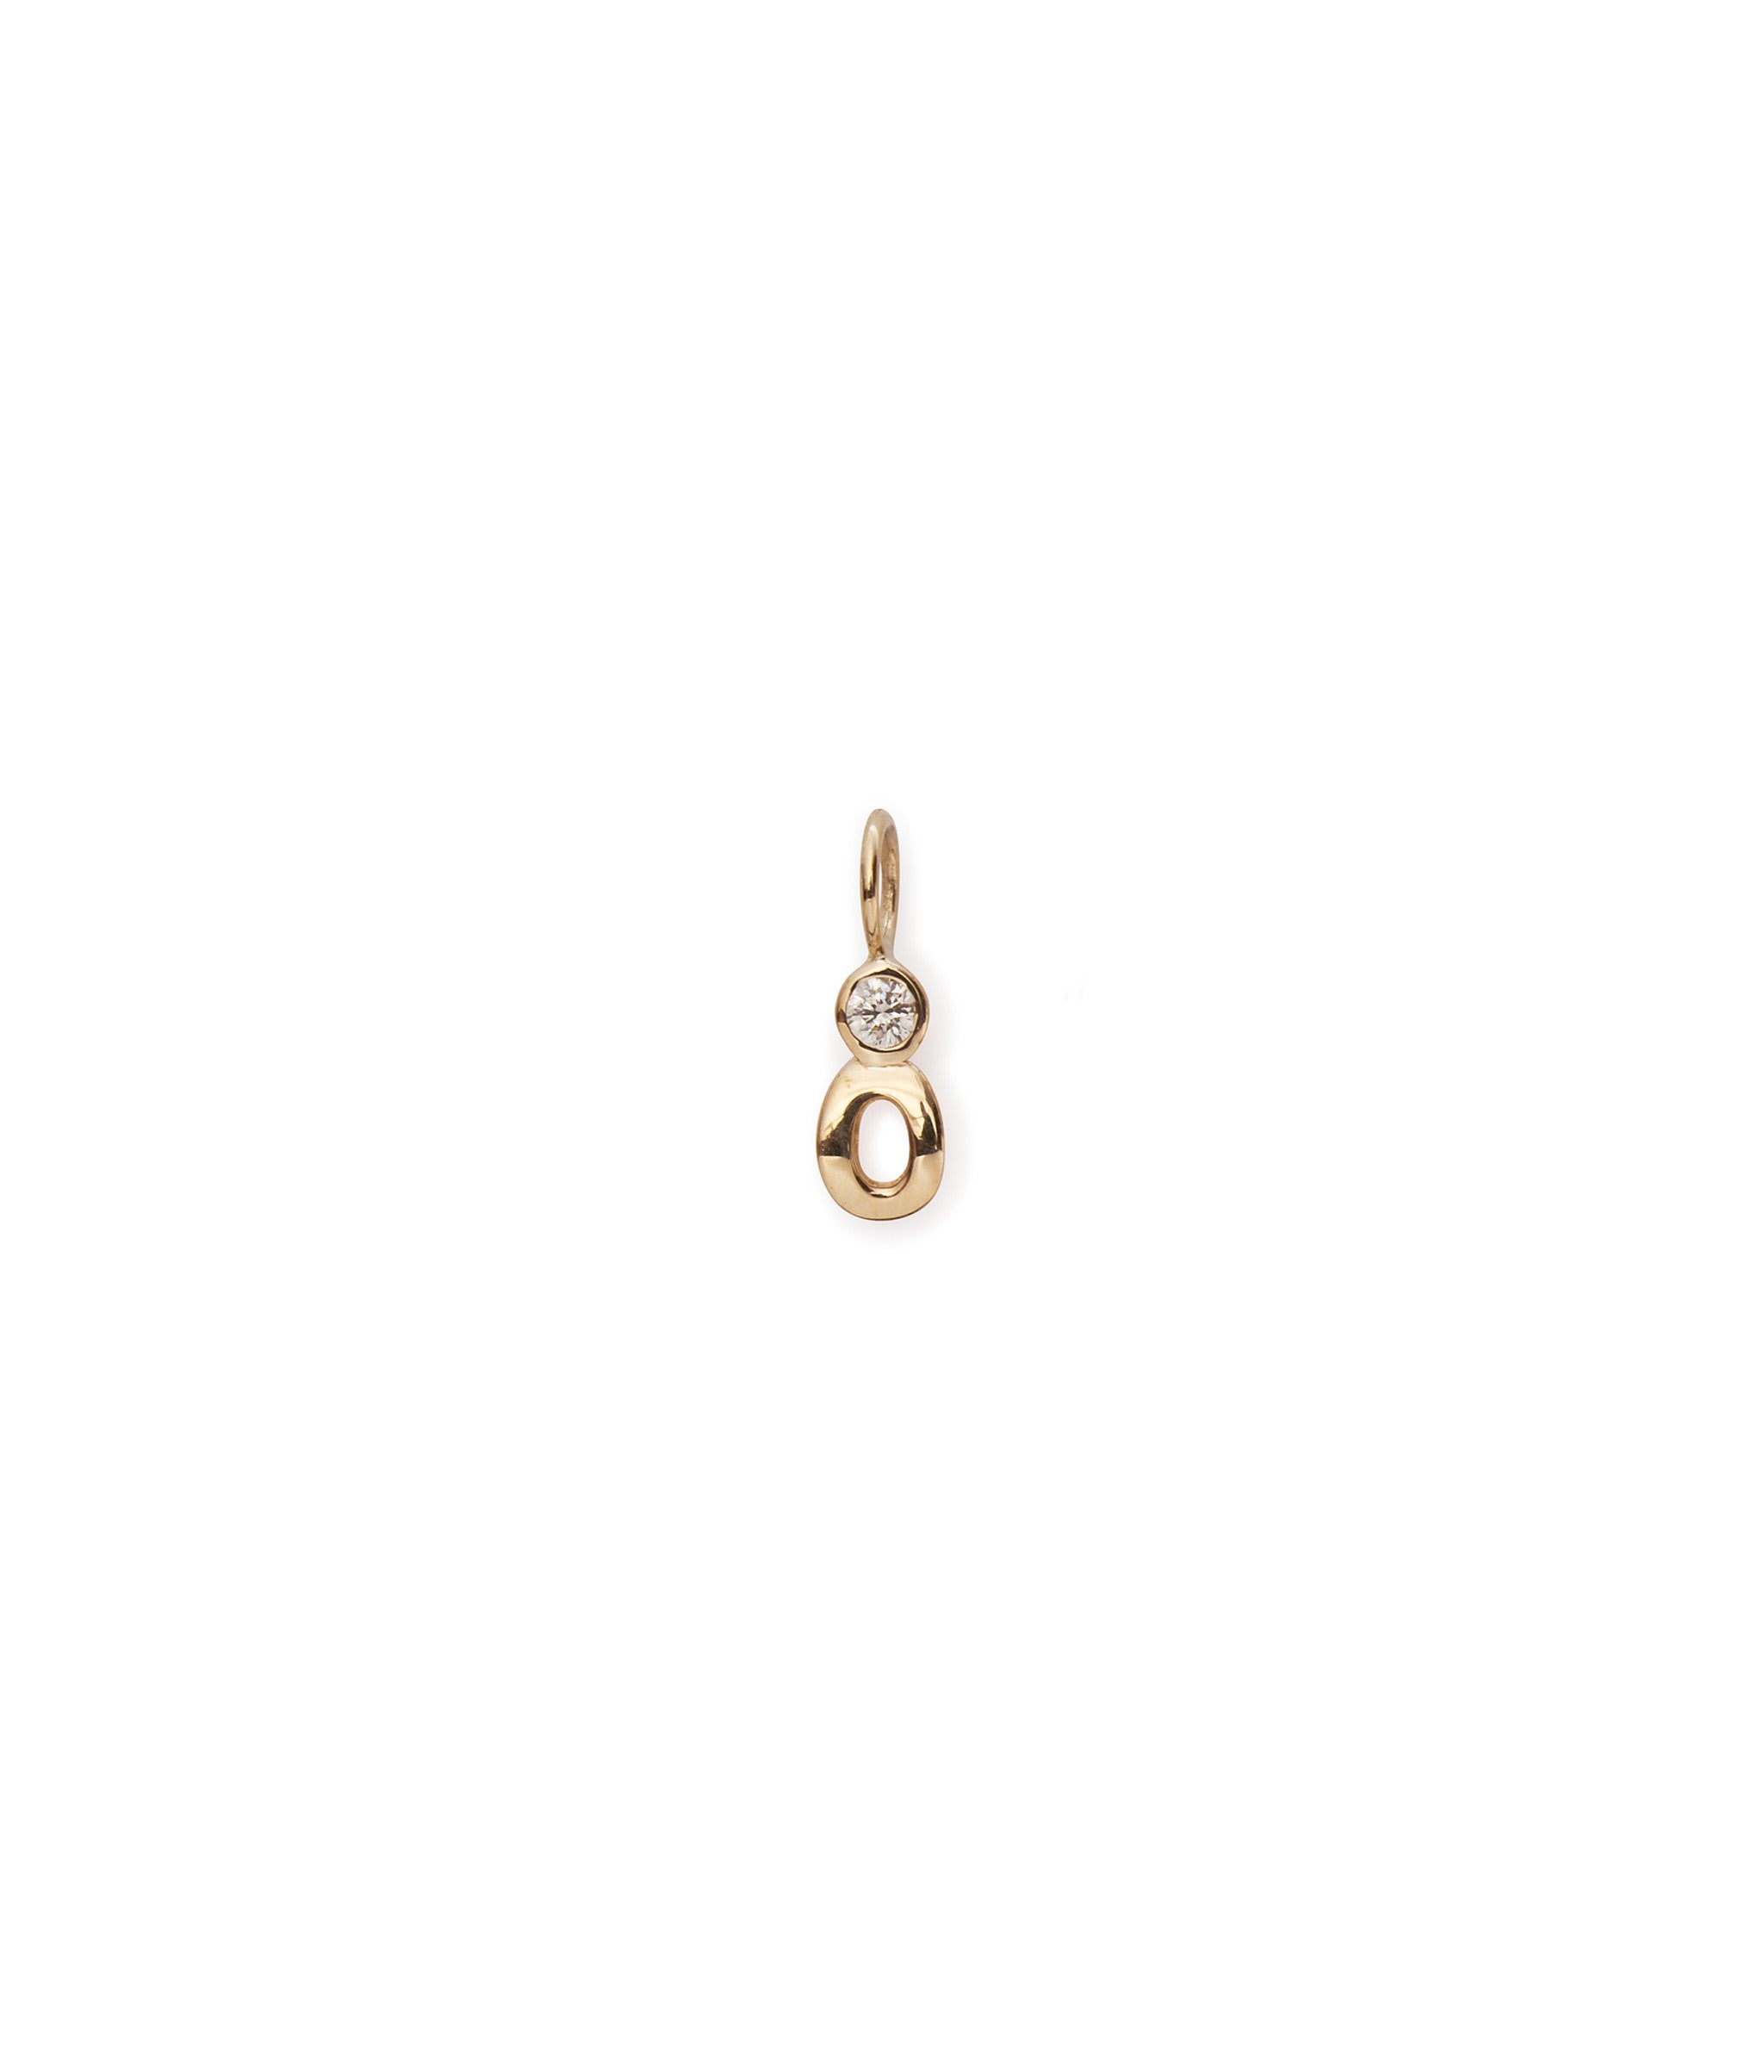 Alphabet Soup "O" Charm. Puffy mini 14k gold letter "O" charm with round diamond accent.